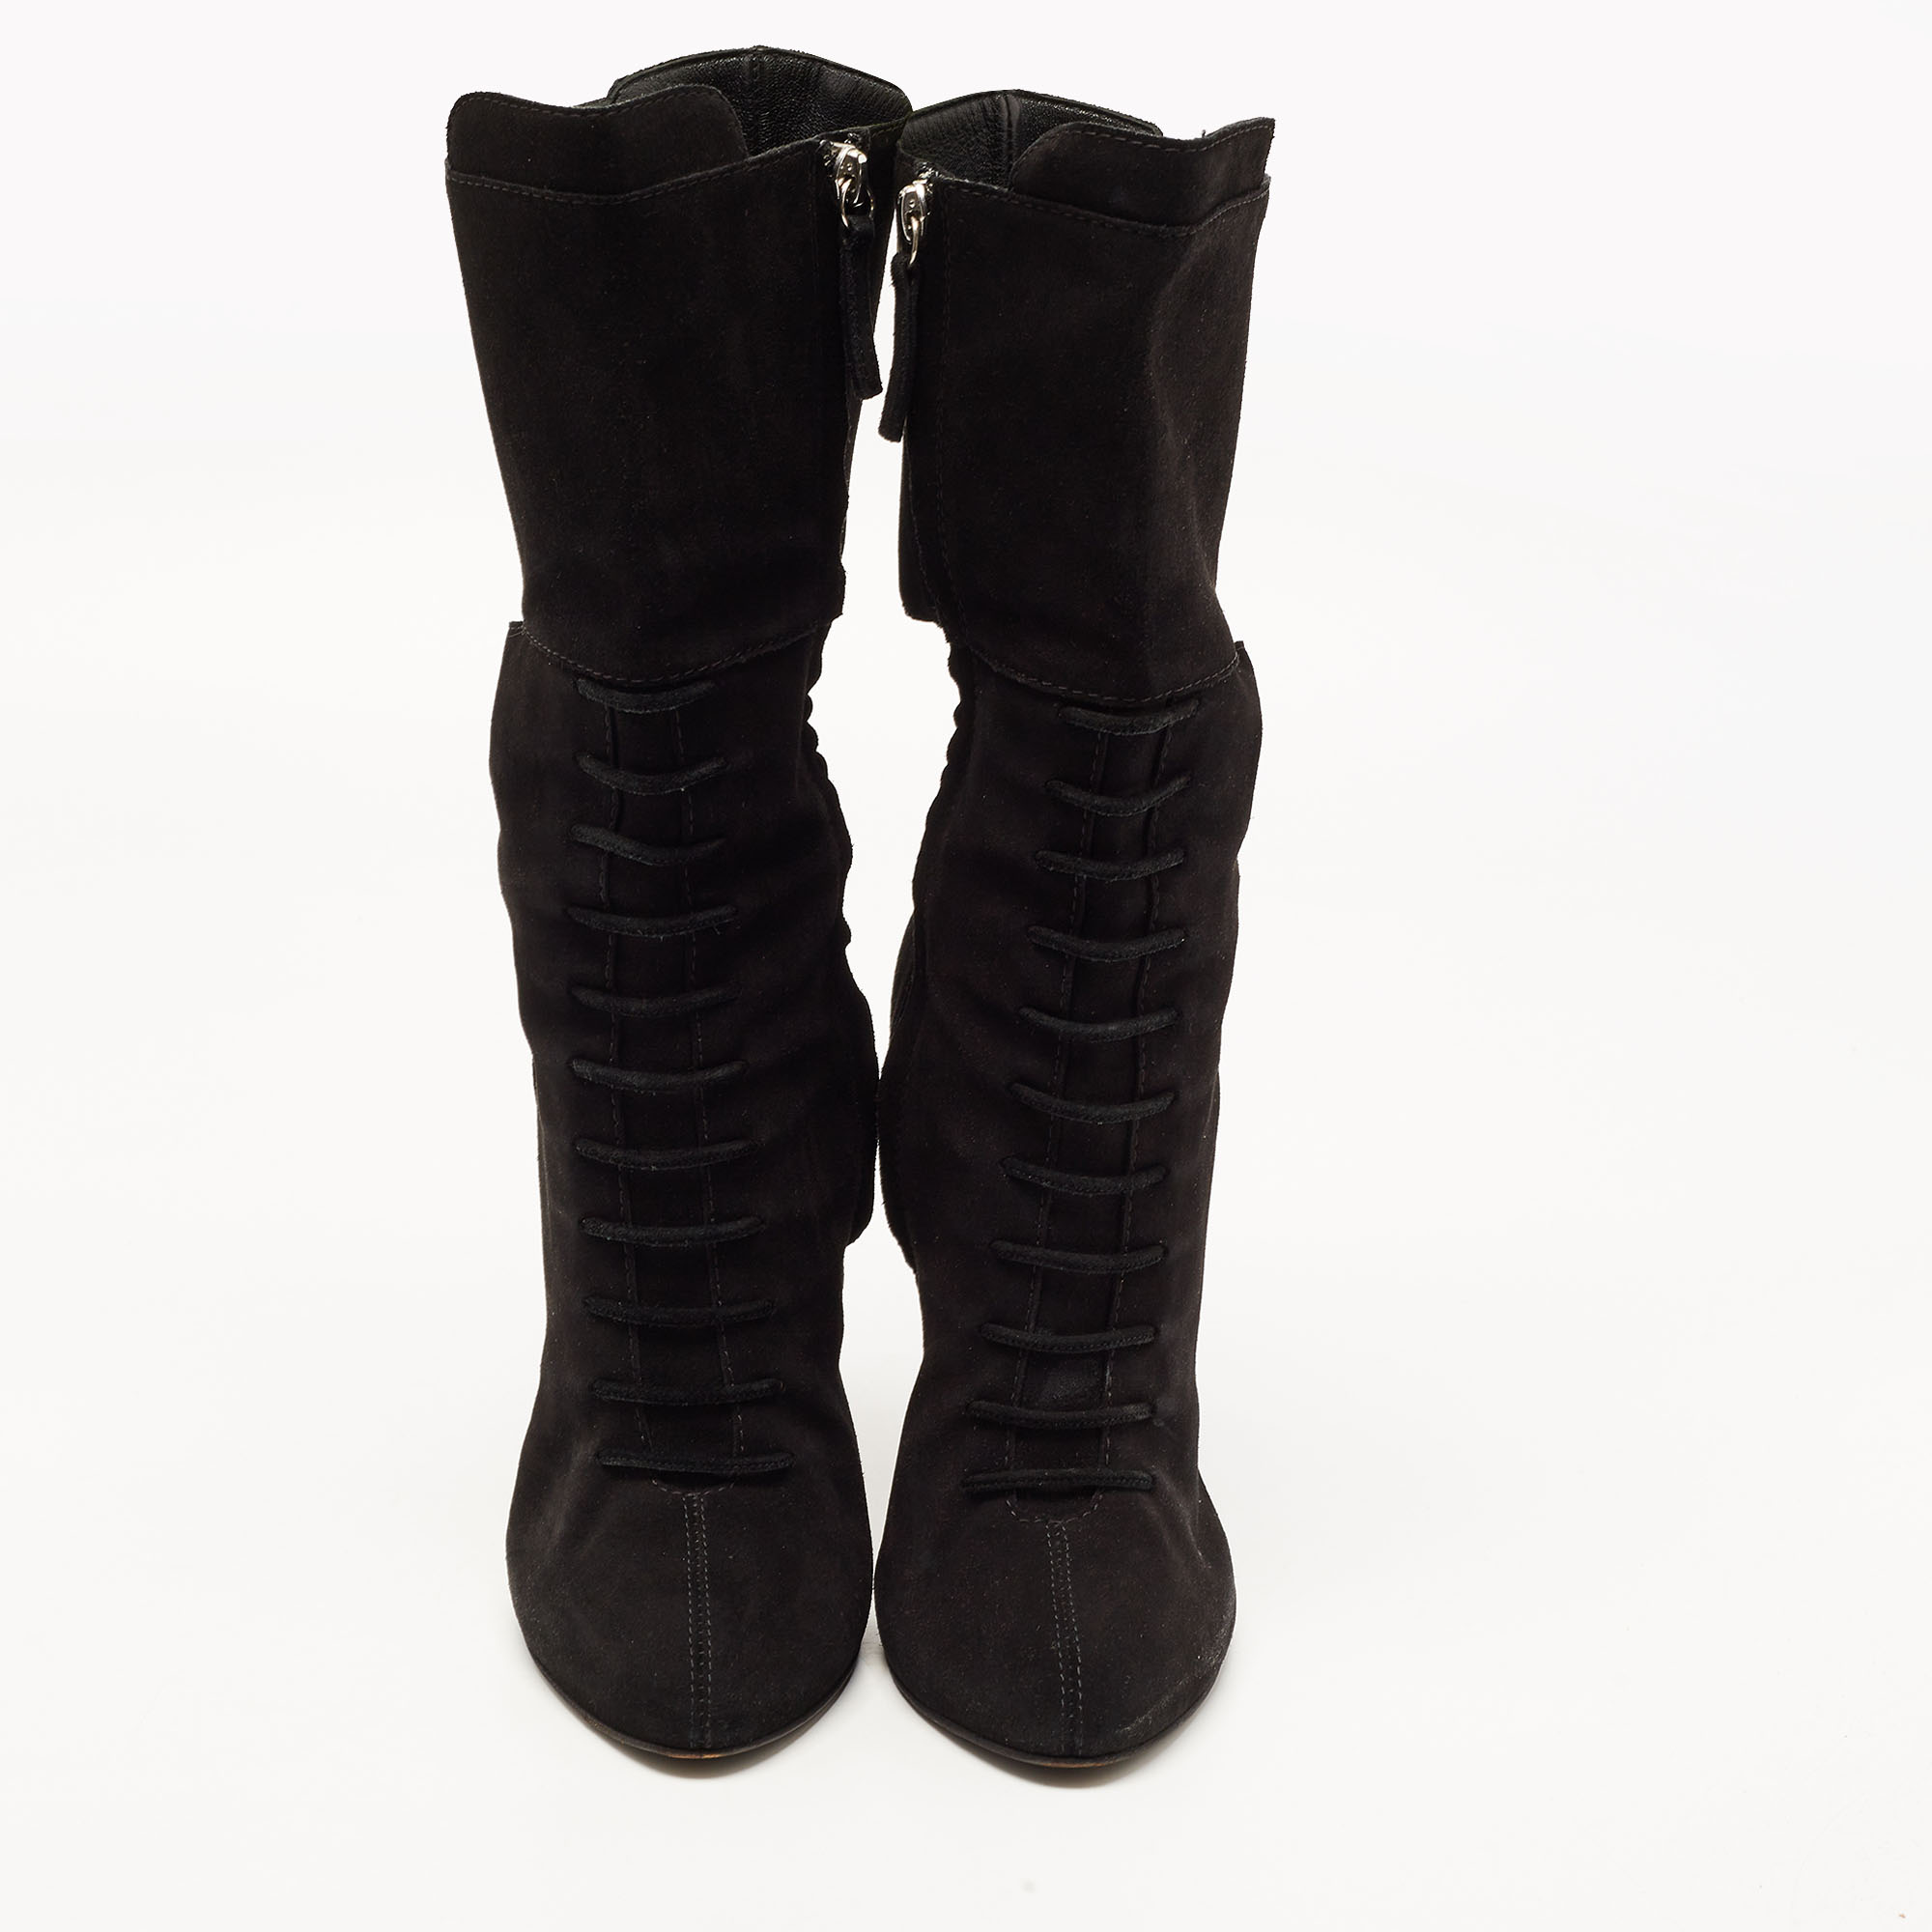 Giuseppe Zanotti Black Suede Crystals Embellished Mid Calf Boots Size 40